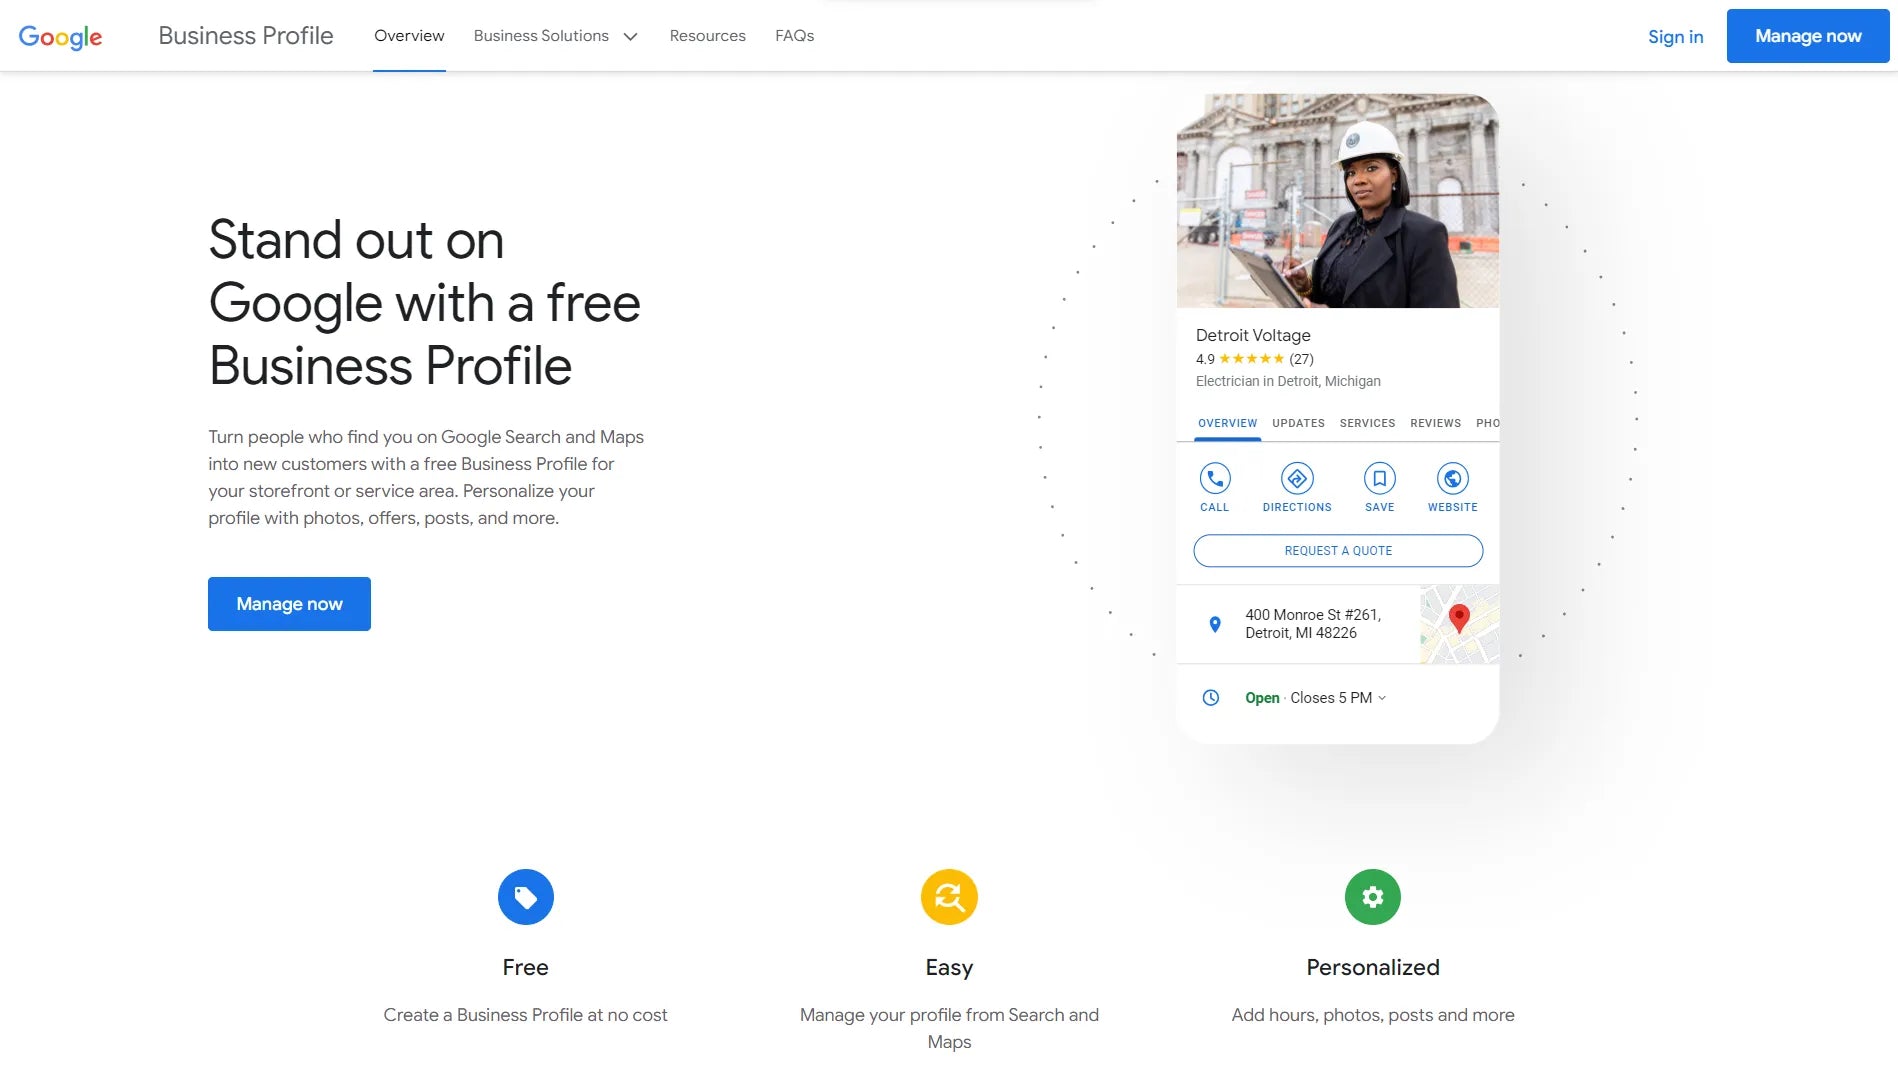 Google Business Profile sign-up page